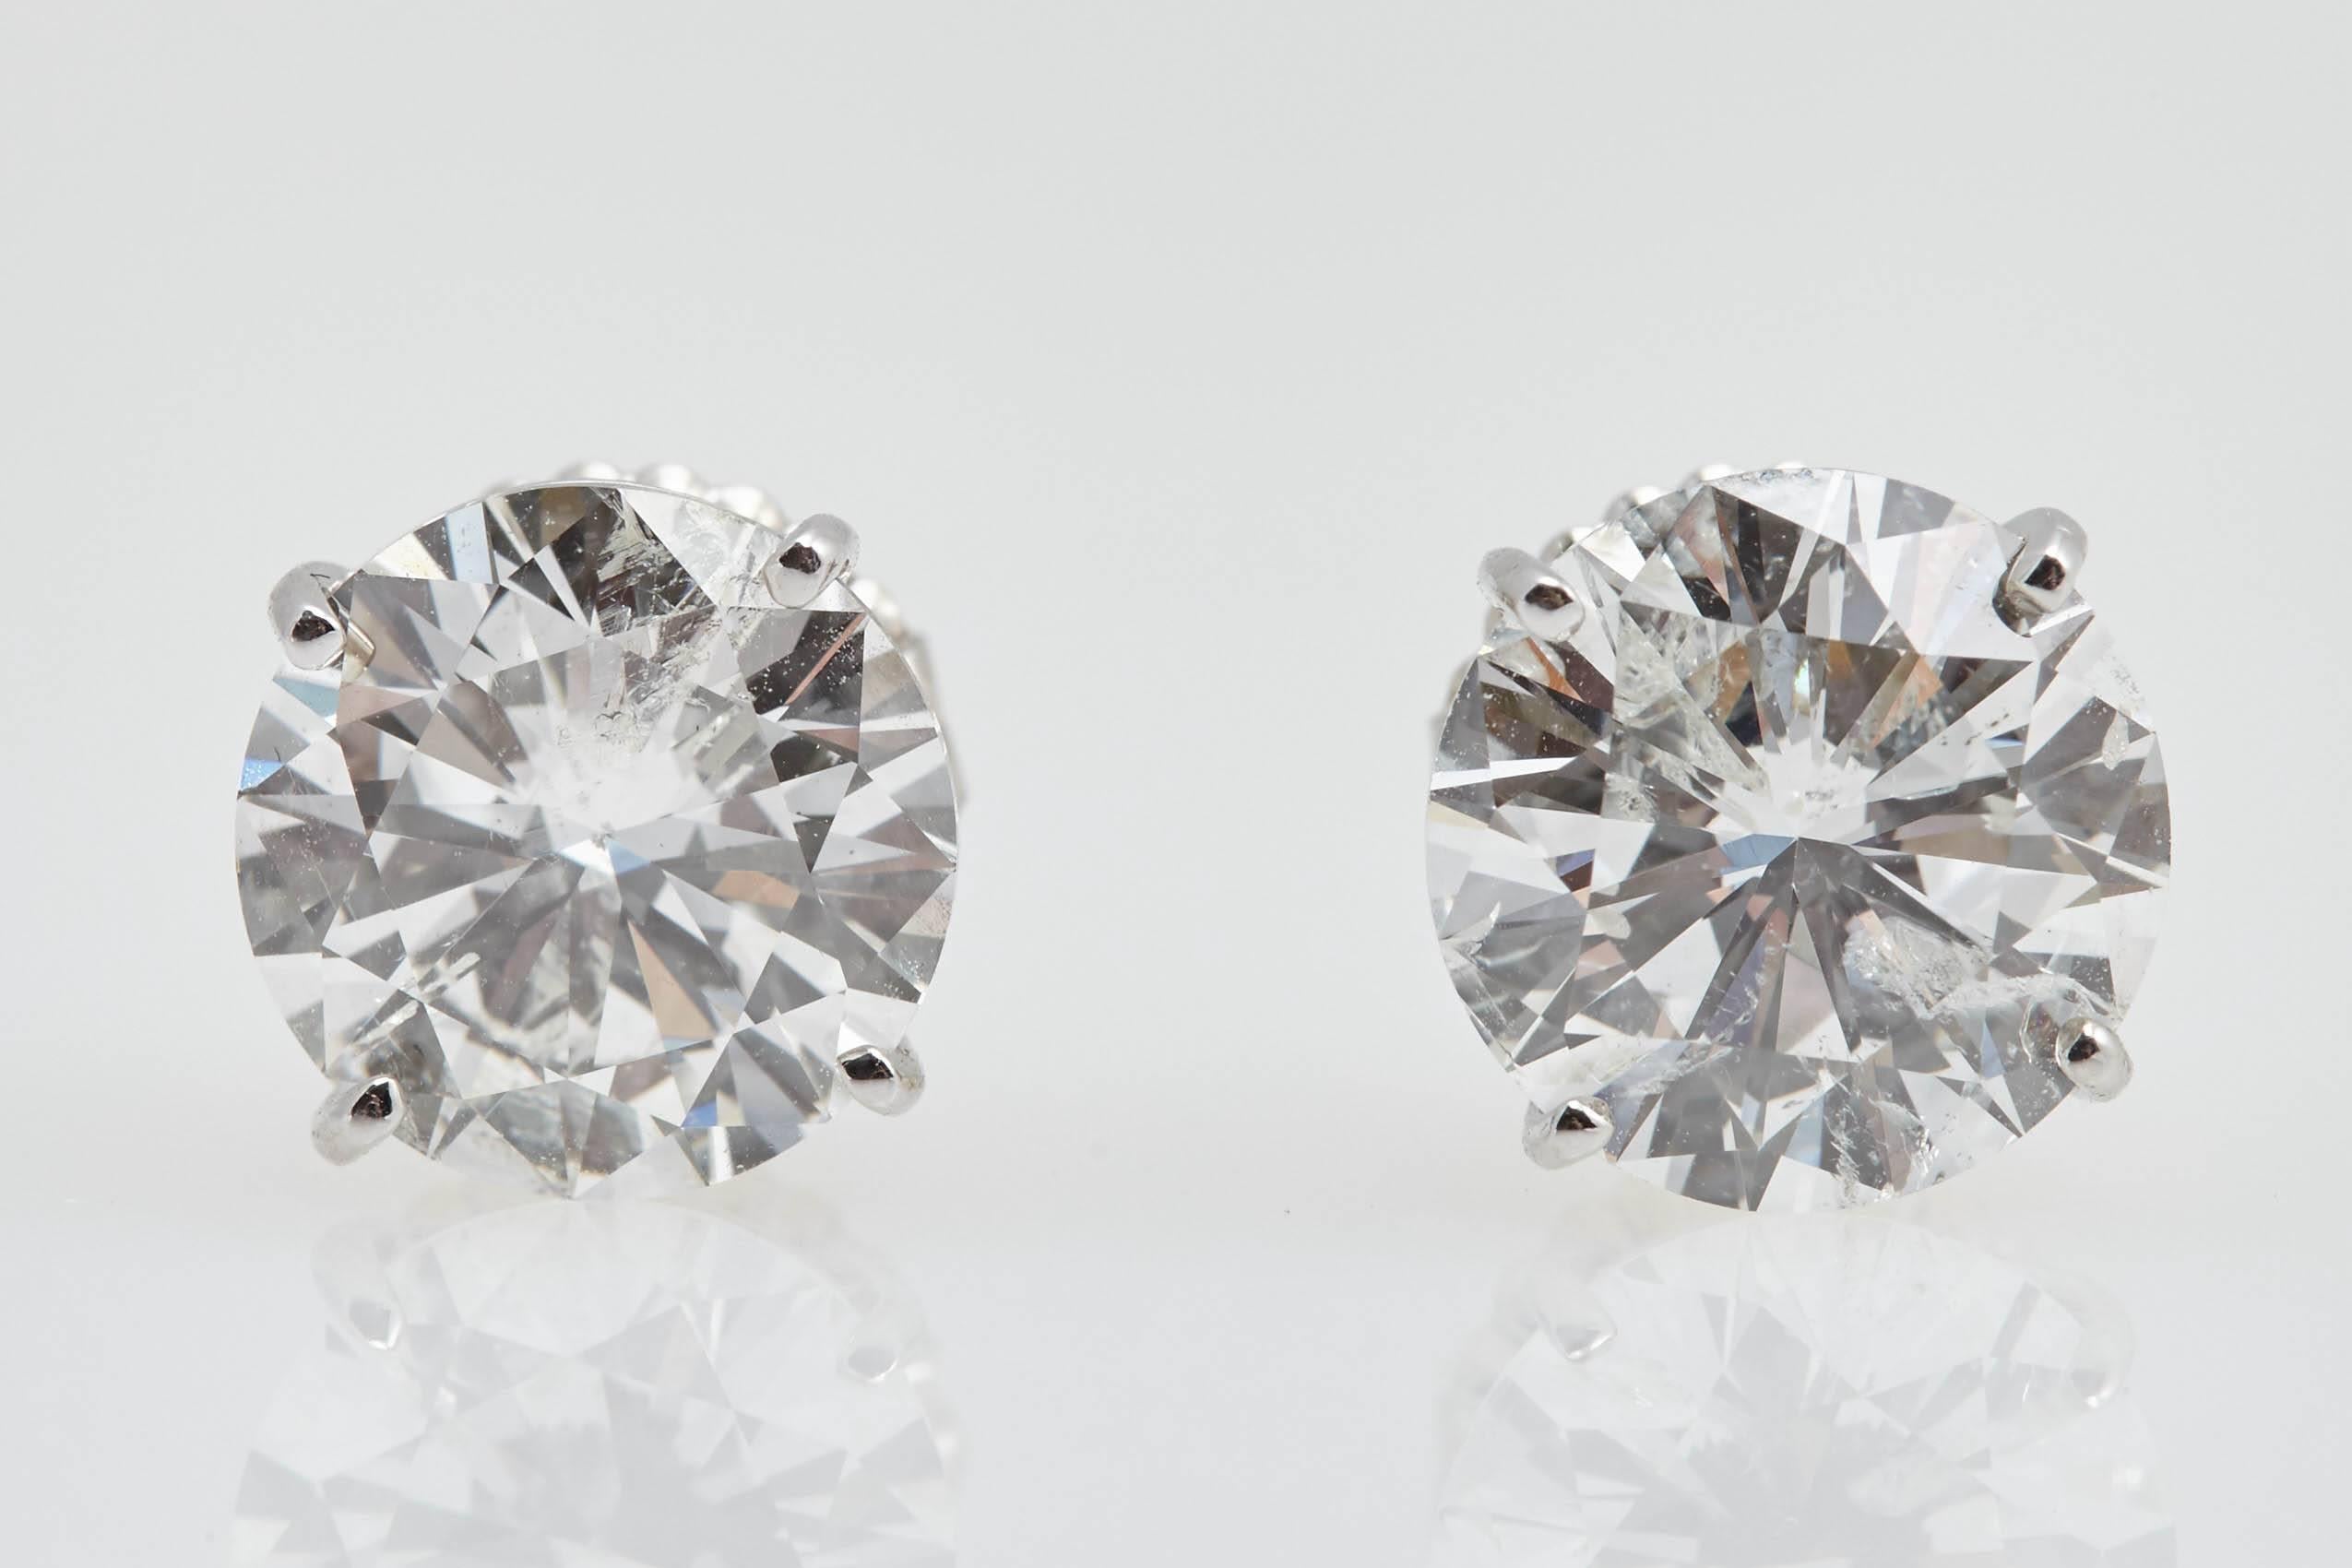  If you're looking for a pair of large diamond earrings that look great. These stunning earrings have a total weight of 7.01 carats. The diamonds are mounted in 14 karat white gold.  The diamonds are 